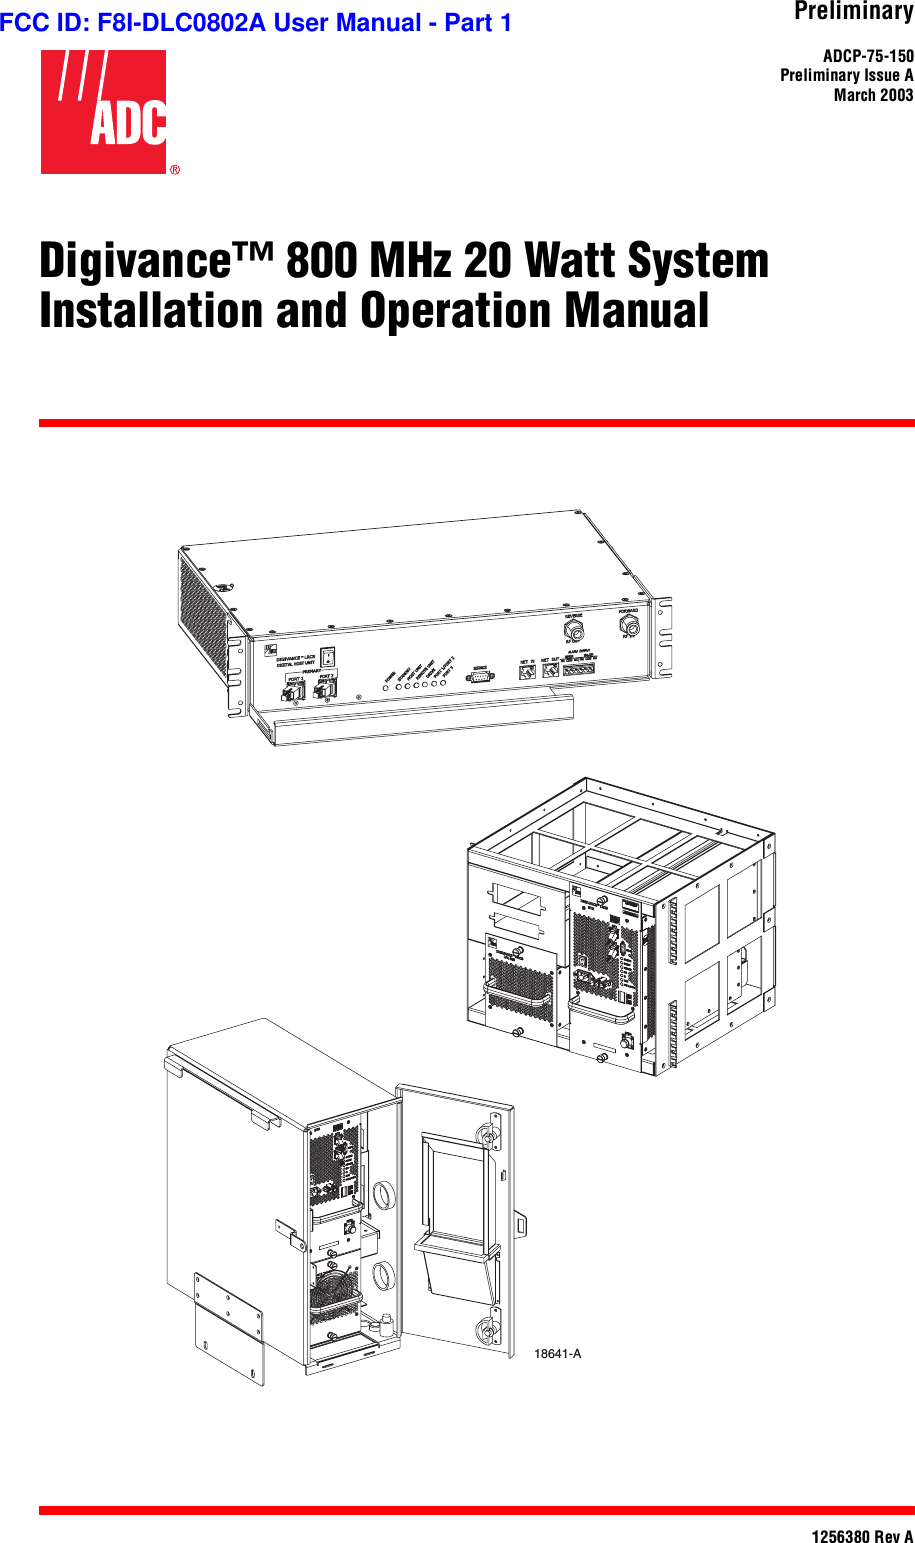 PreliminaryADCP-75-150Preliminary Issue AMarch 20031256380 Rev ADigivance™ 800 MHz 20 Watt SystemInstallation and Operation Manual18641-AFCC ID: F8I-DLC0802A User Manual - Part 1